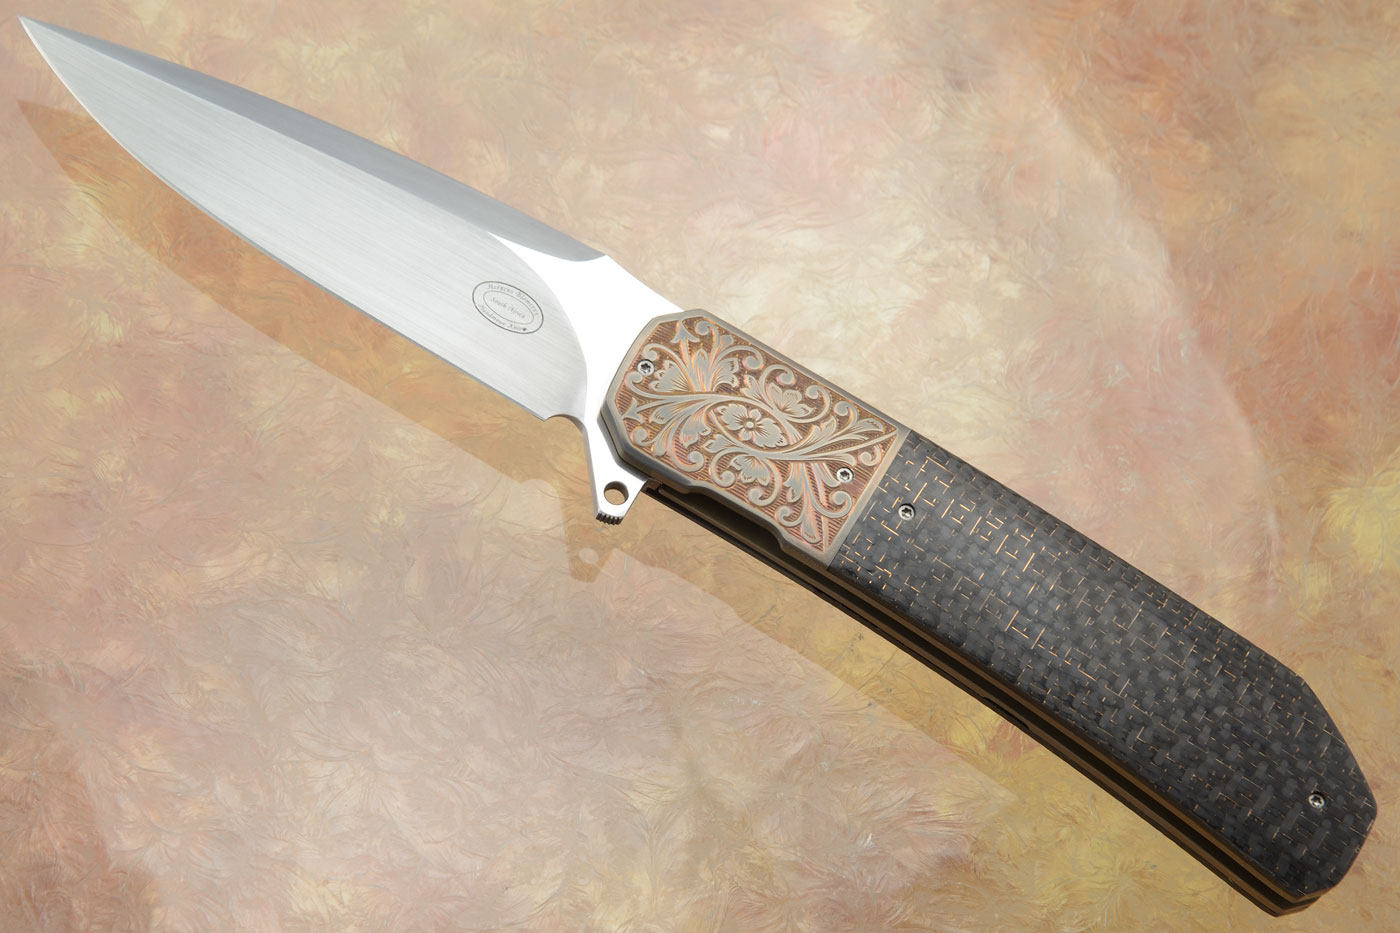 LL14 with Lightning Strike Carbon Fiber and Engraved Zirconium (IKBS)